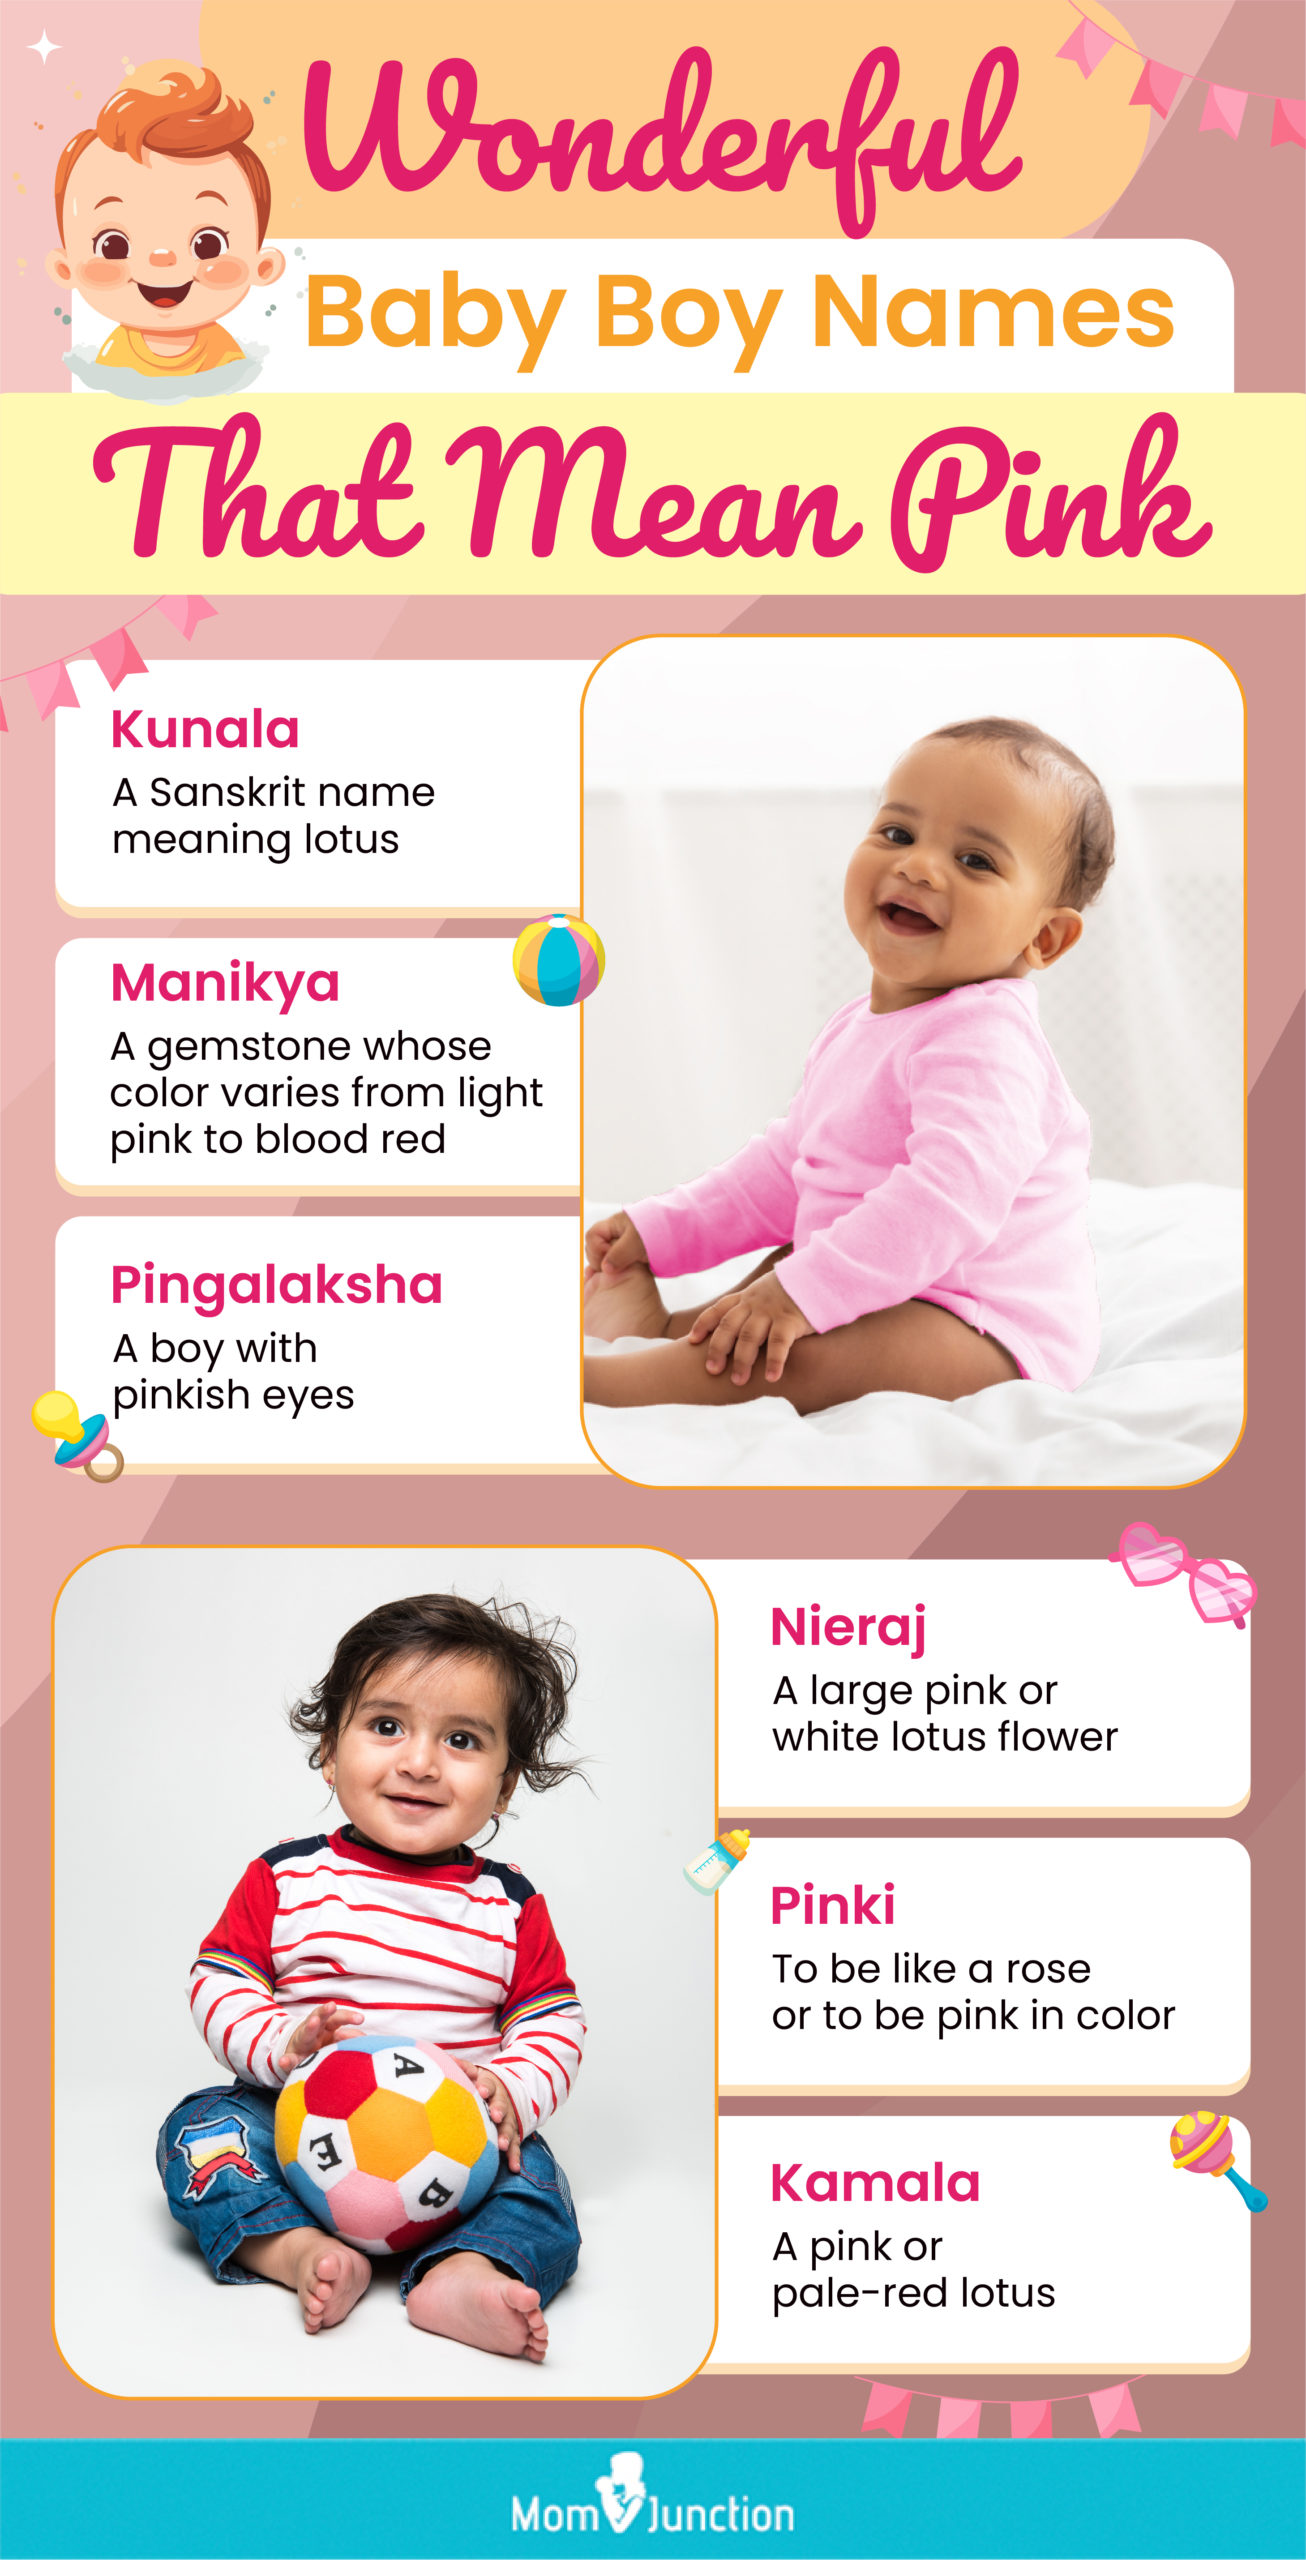 wonderful baby boy names that mean pink (infographic)